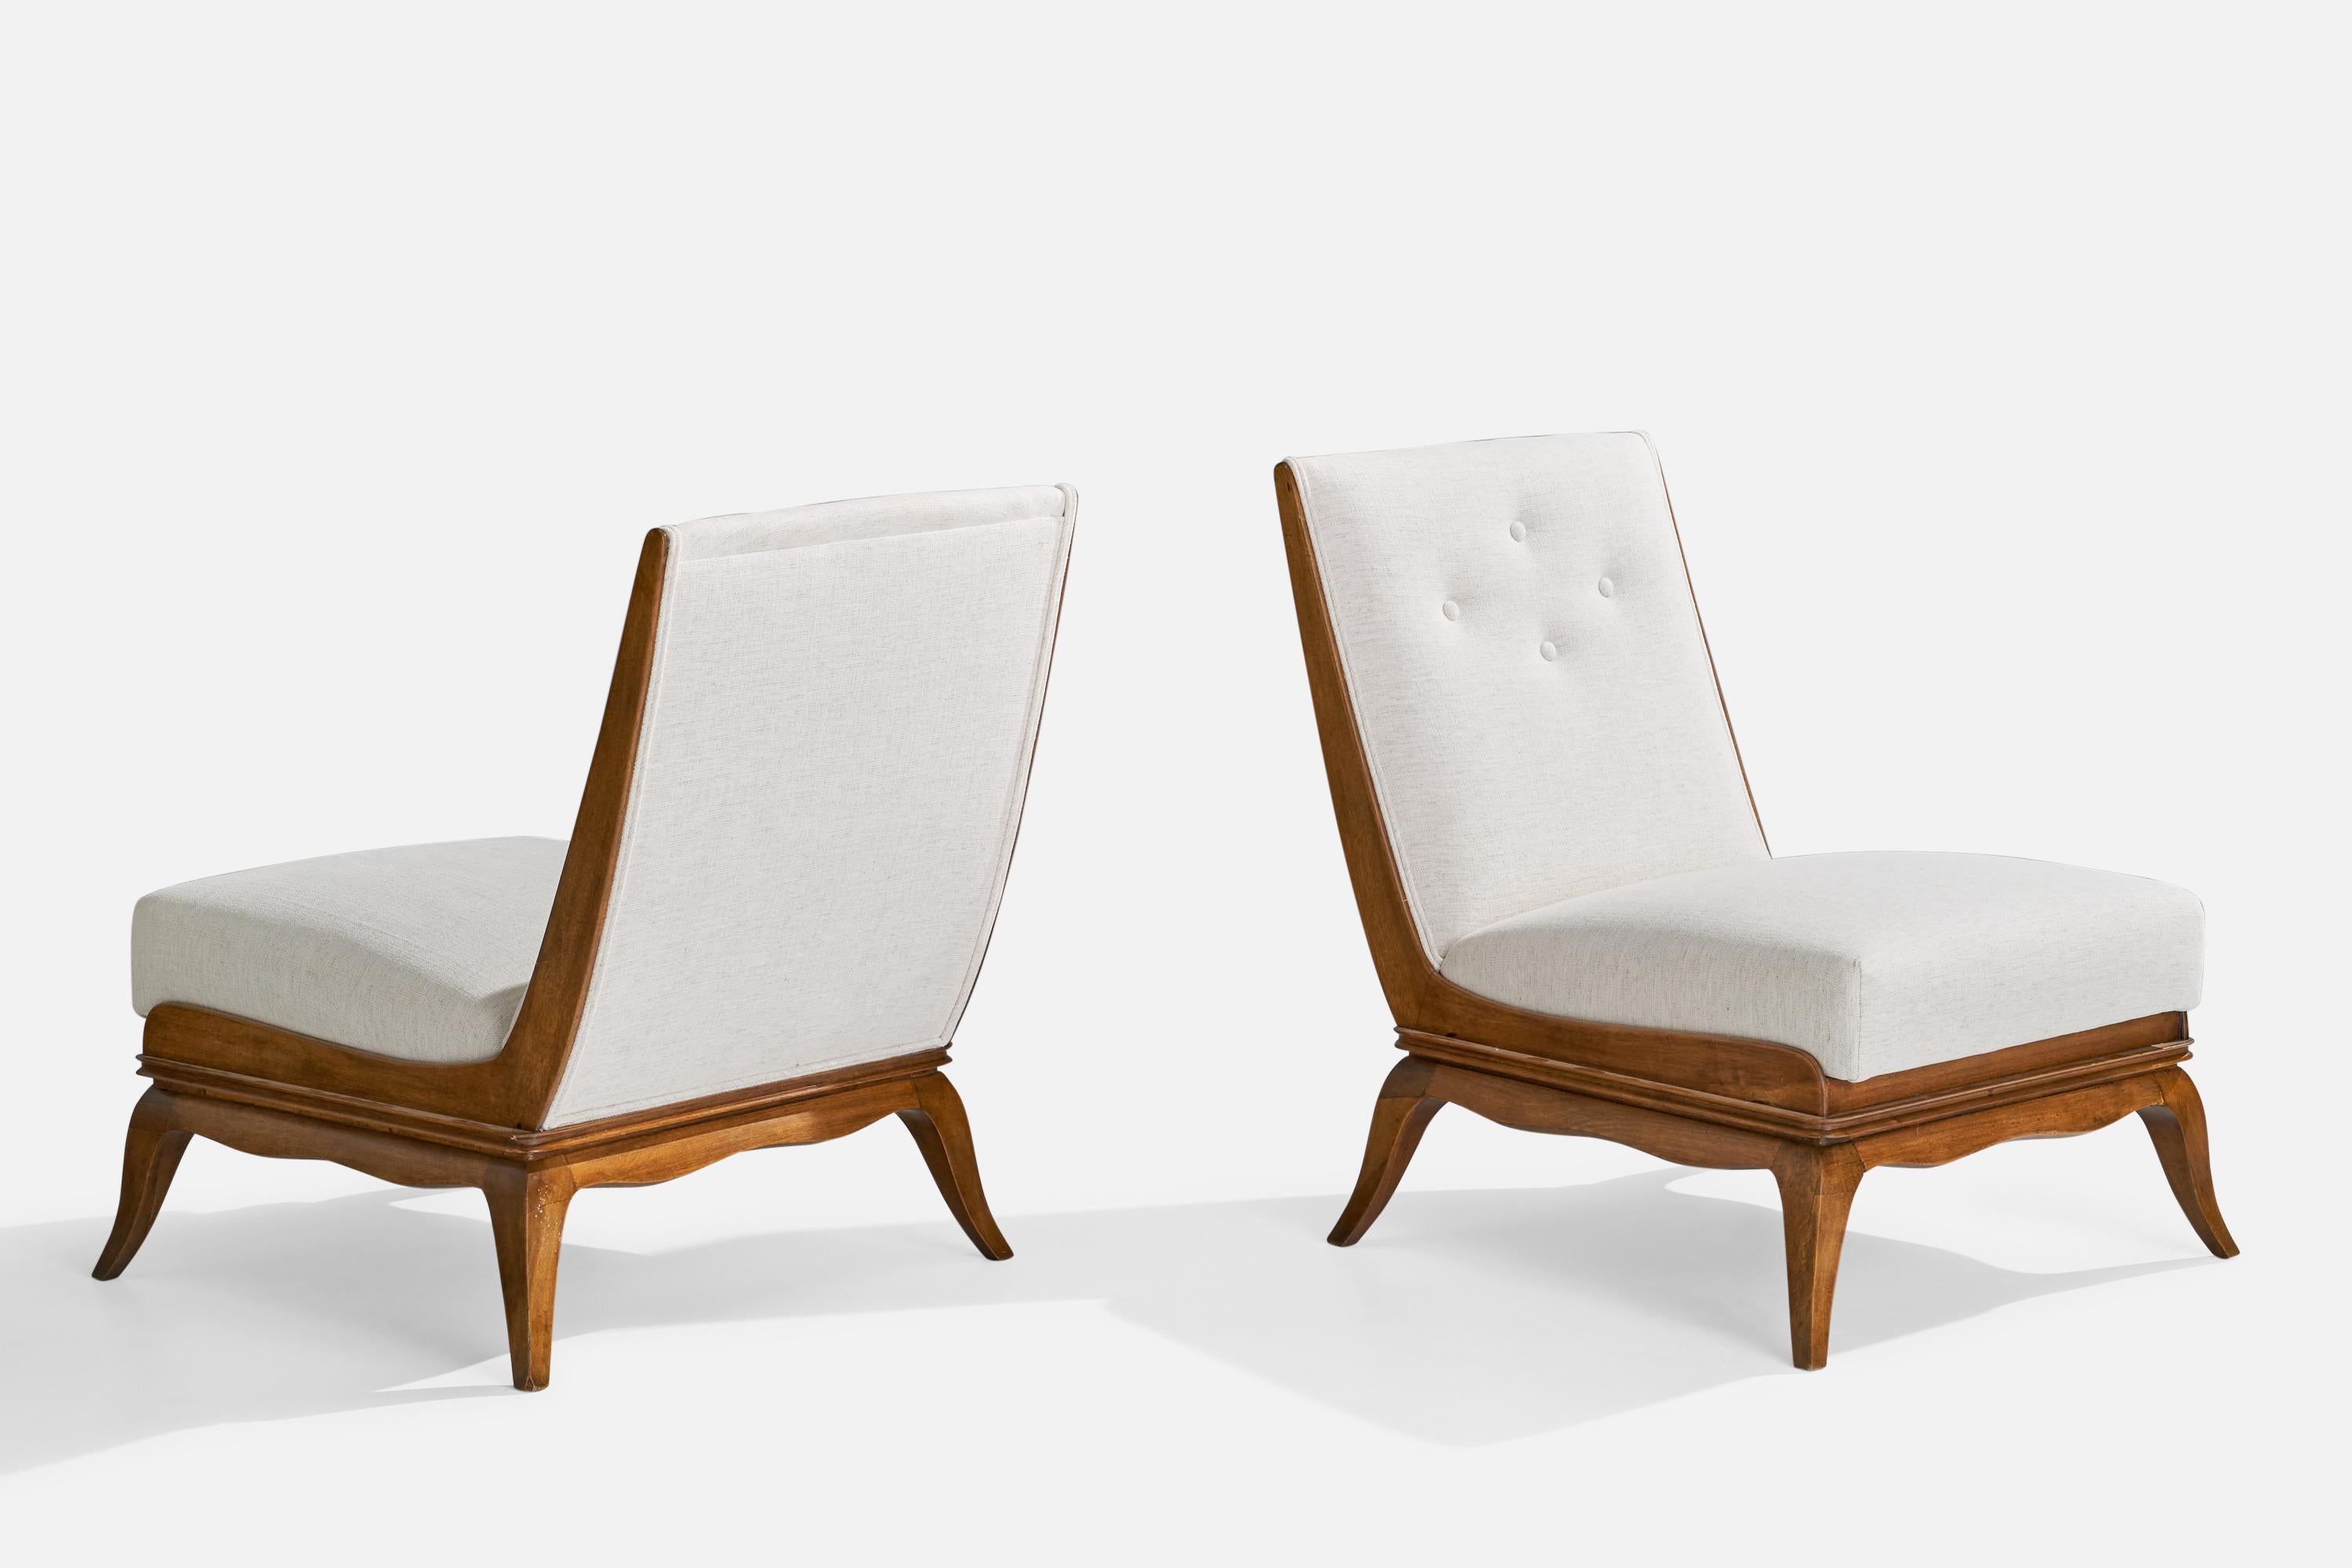 Italian Designer, Slipper Chairs with Ottoman, Walnut, Fabric, Italy, 1940s For Sale 5